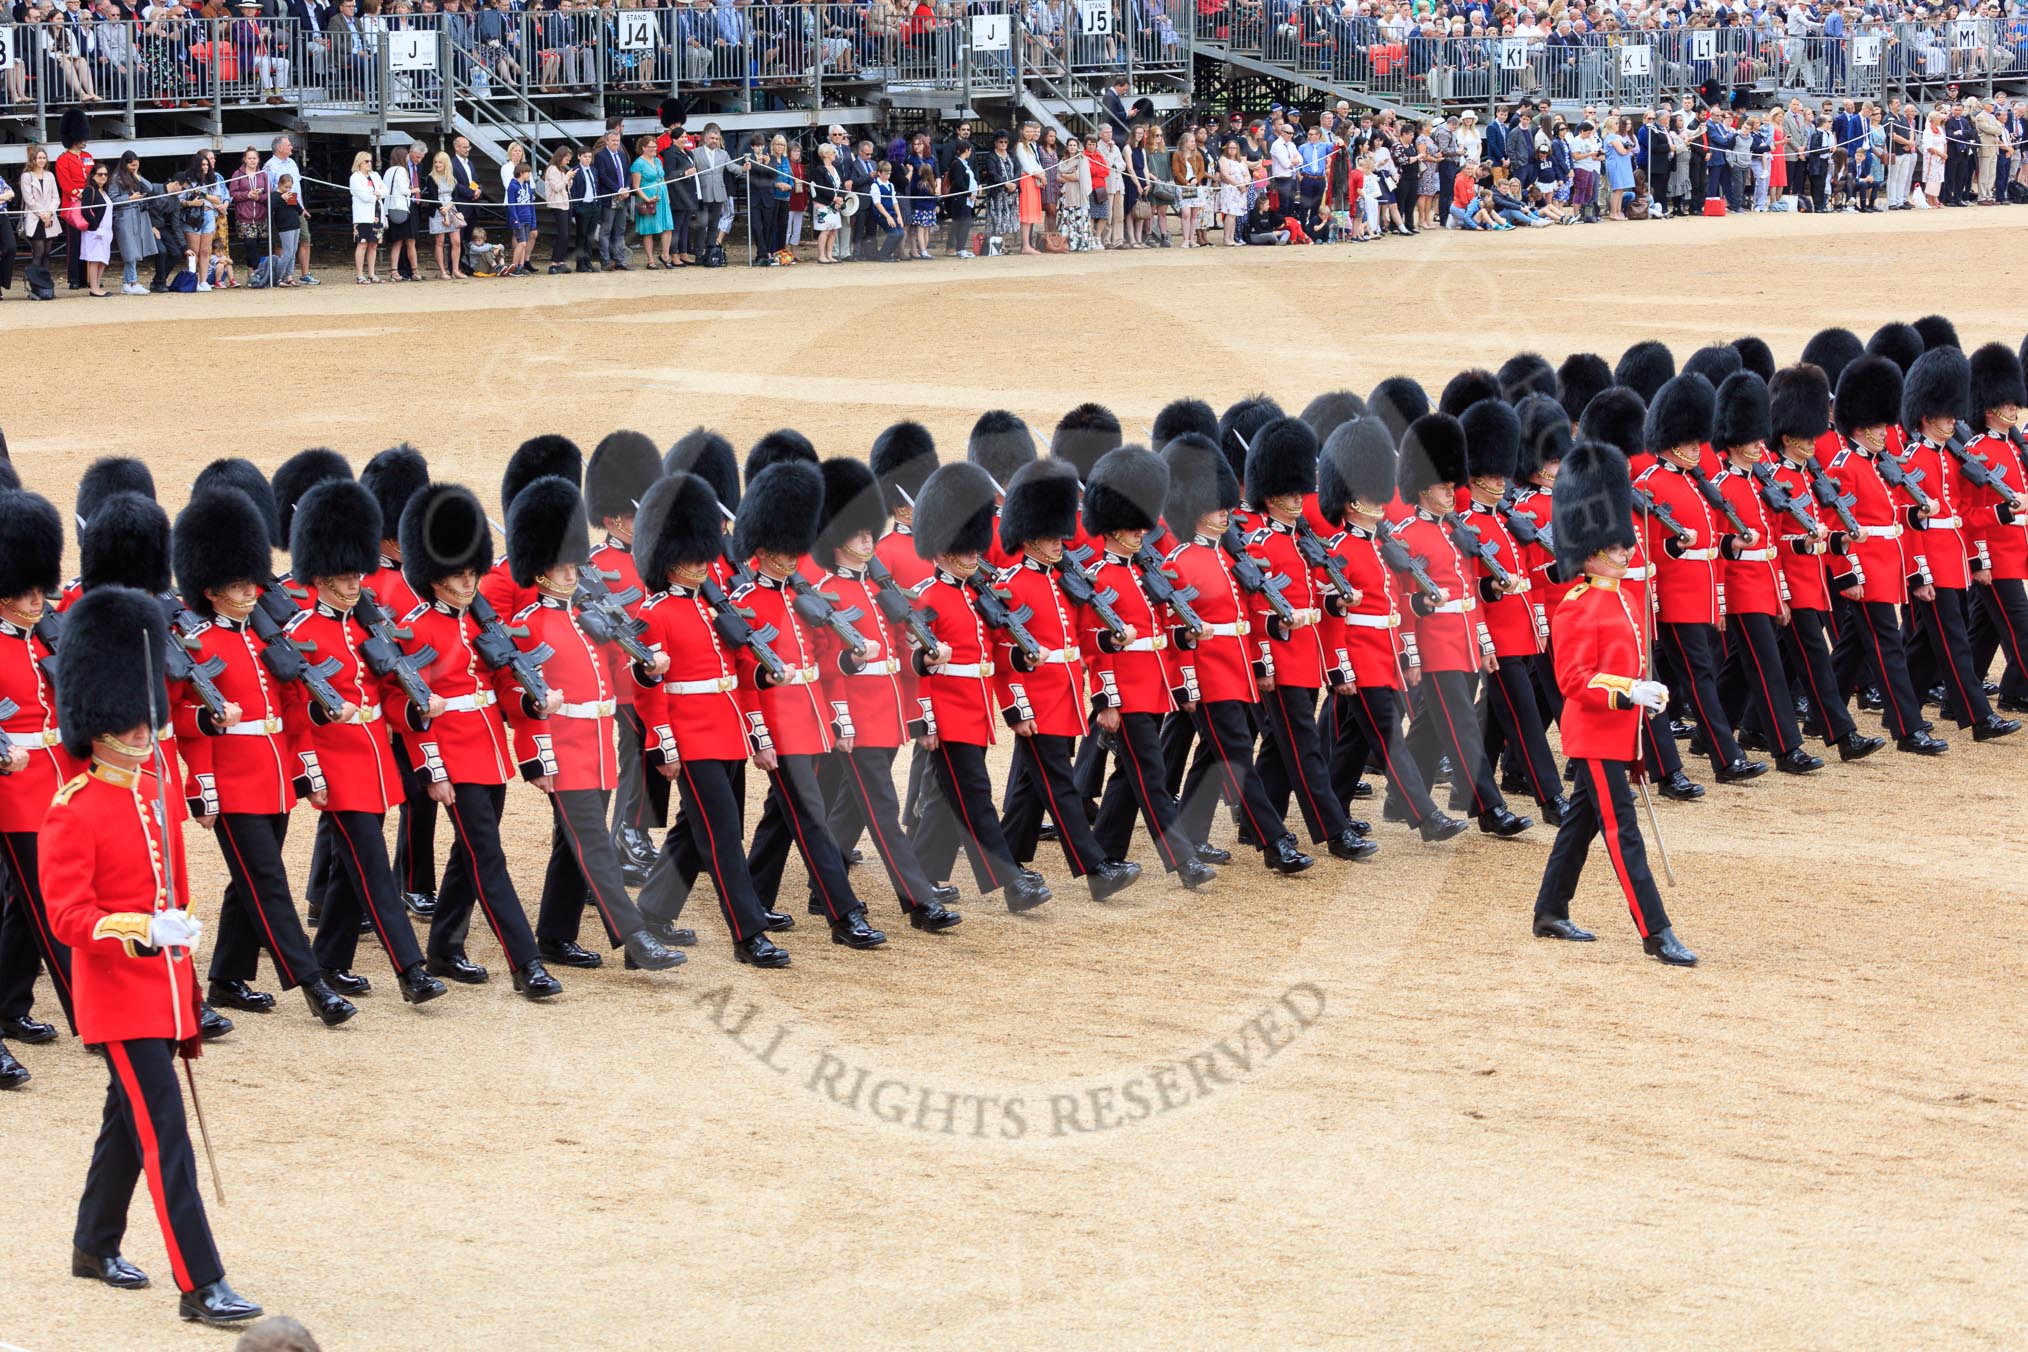 during The Colonel's Review {iptcyear4} (final rehearsal for Trooping the Colour, The Queen's Birthday Parade)  at Horse Guards Parade, Westminster, London, 2 June 2018, 11:39.